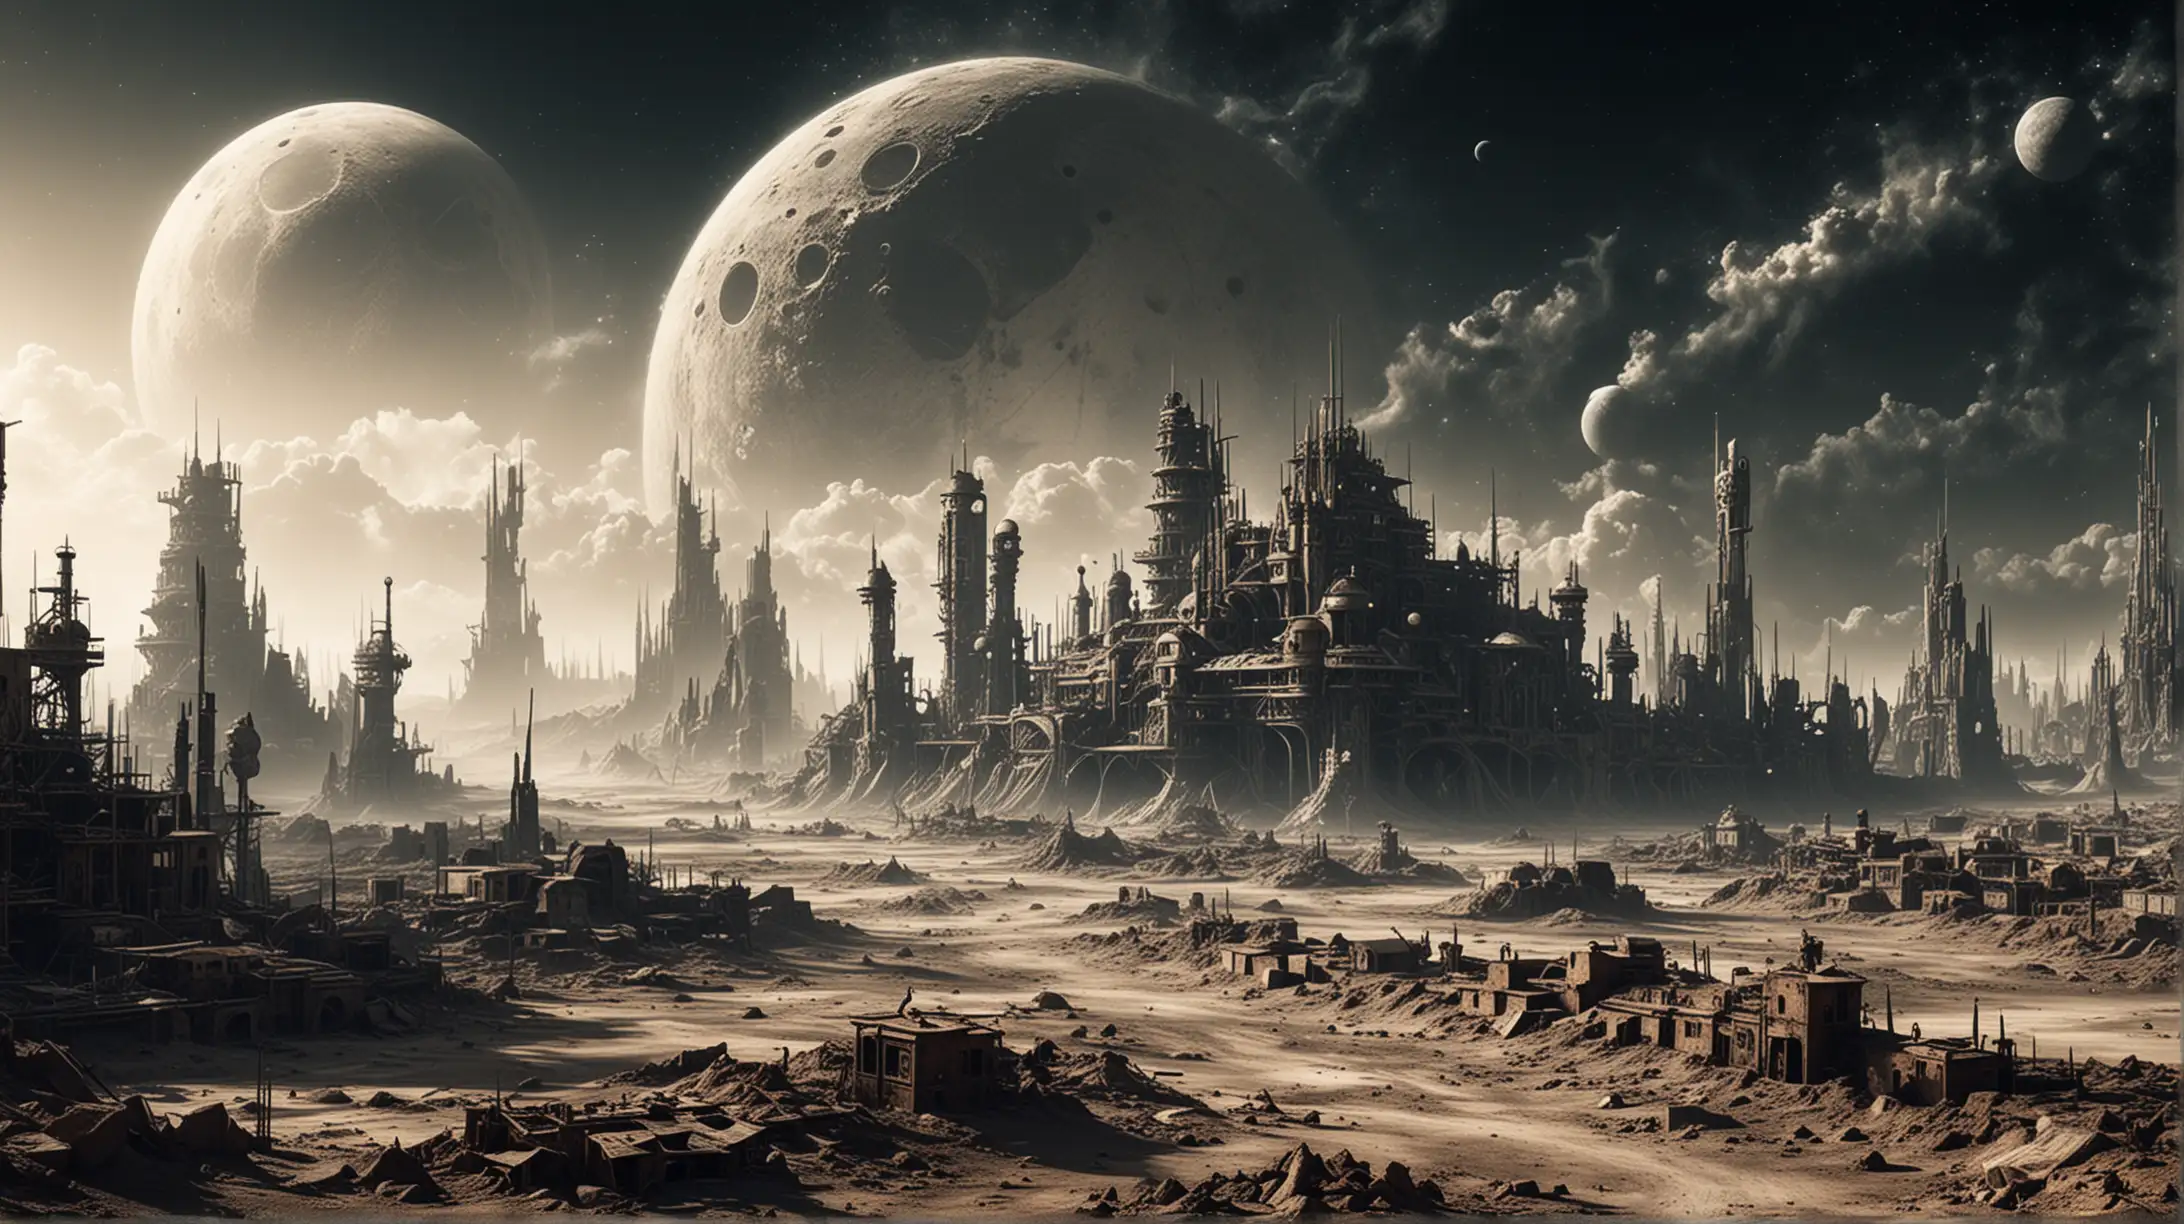 Desolate Steampunk City on Moon with Earth in Sky